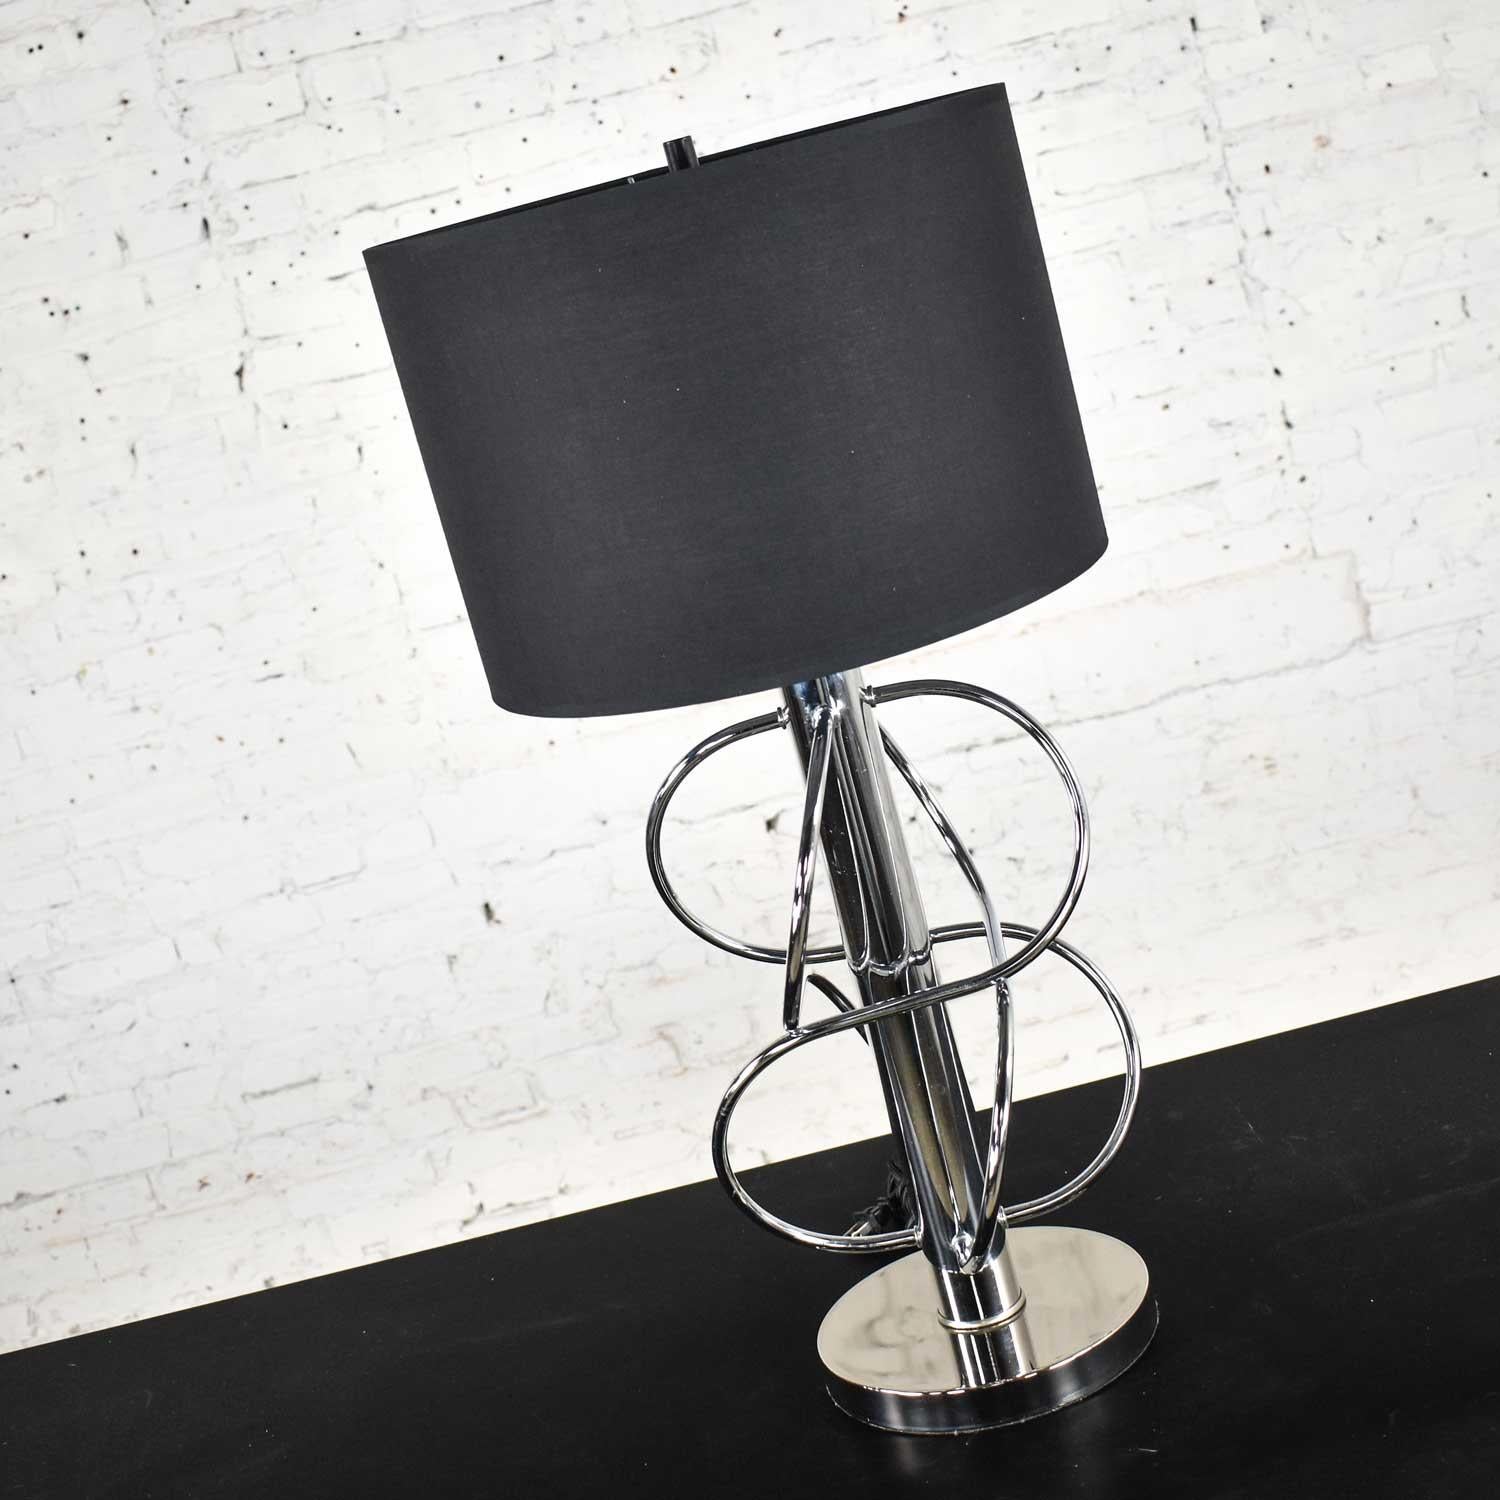 Vintage Mid-Century Modern Polished Chrome Table Lamp New Black Drum Shade In Good Condition For Sale In Topeka, KS